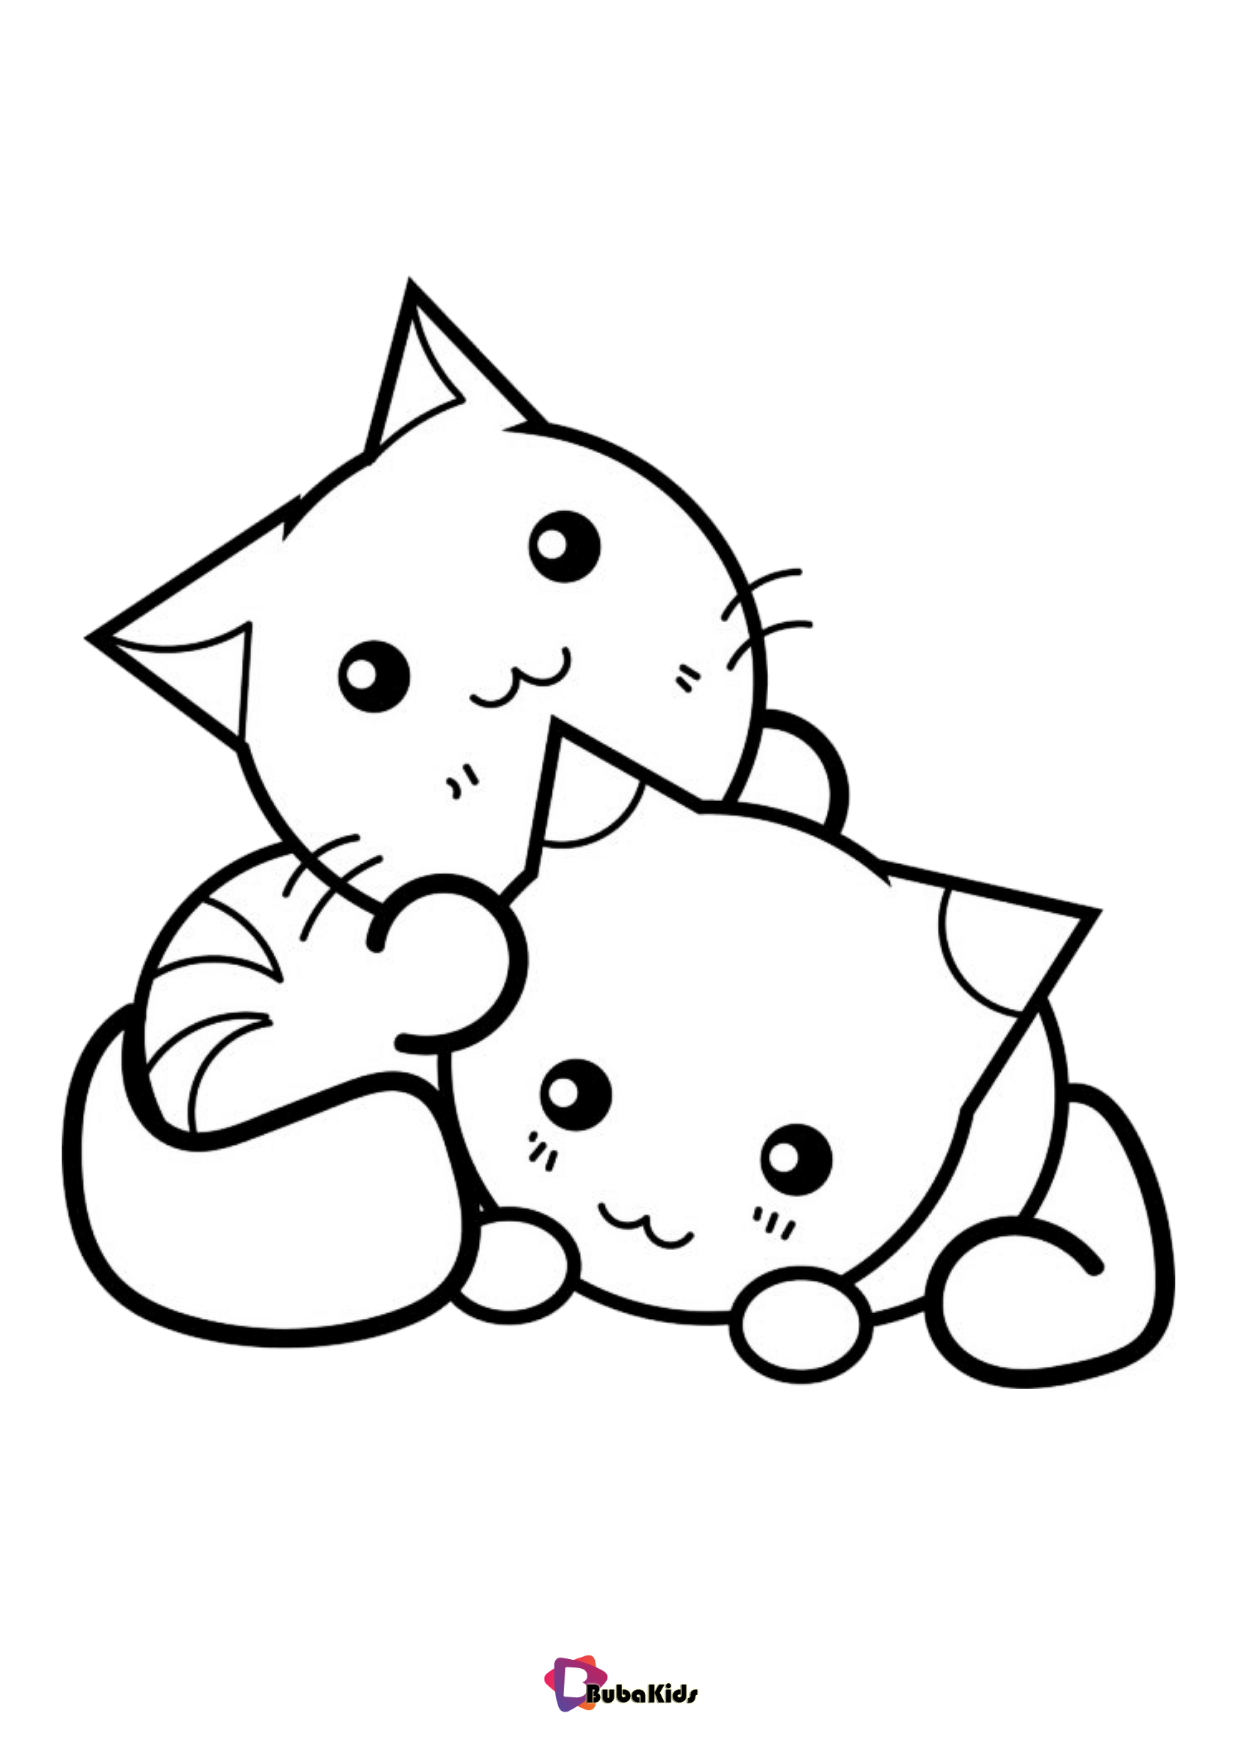 Cute kittens coloring pages bubakids cat animal coloring   BubaKids.com